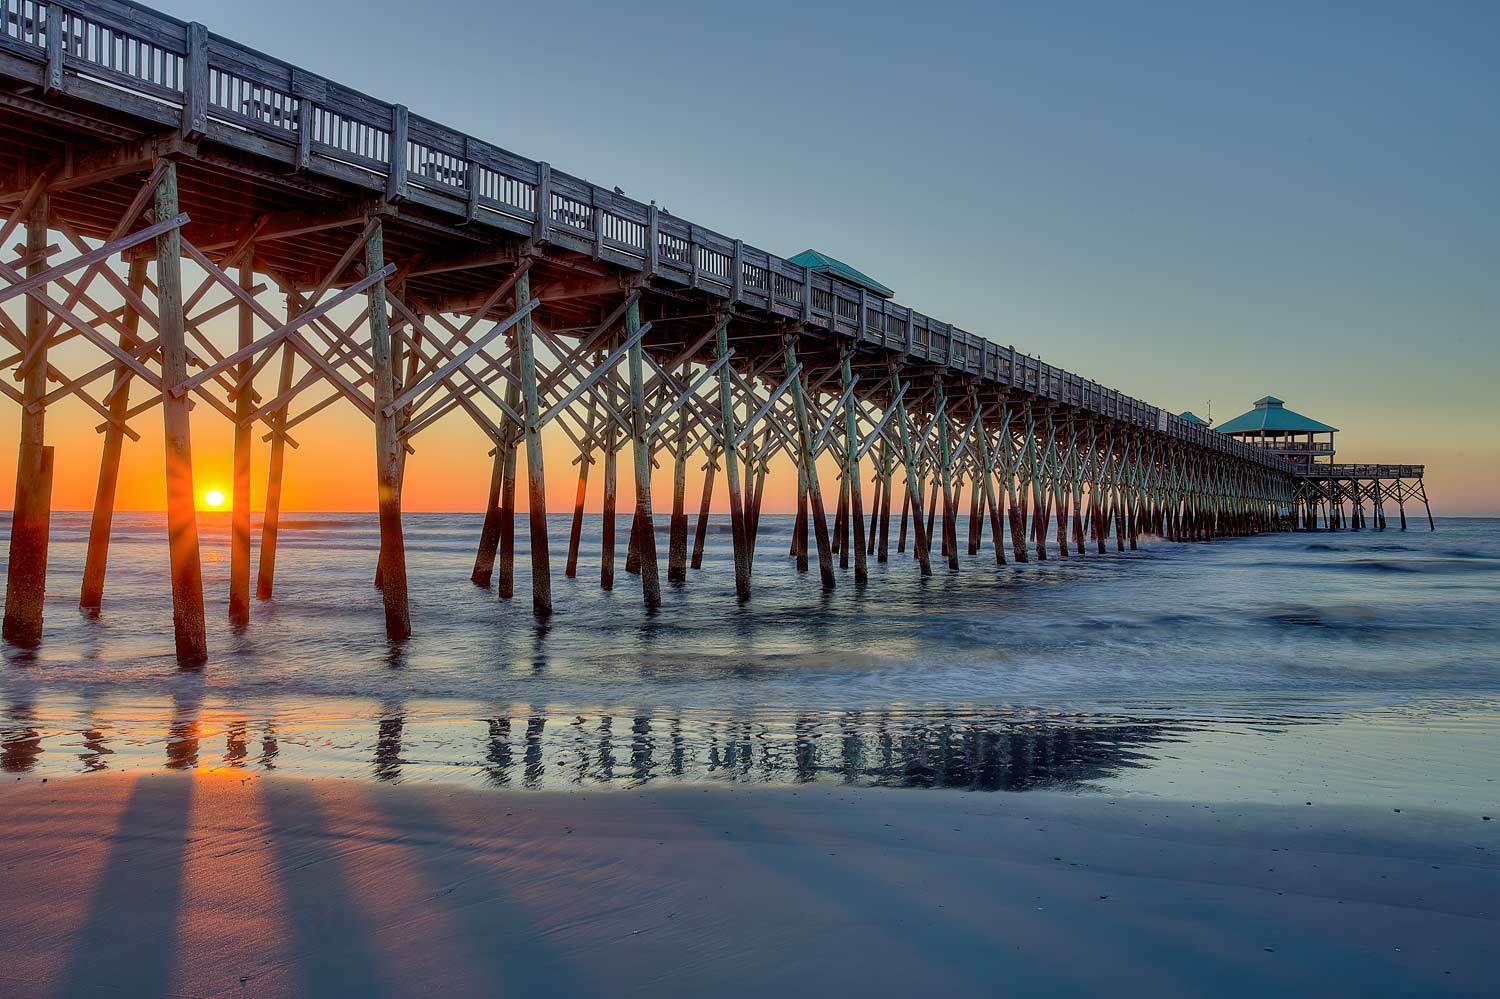 Folly Beach Named One Of The 20 Greatest Beach Towns In America